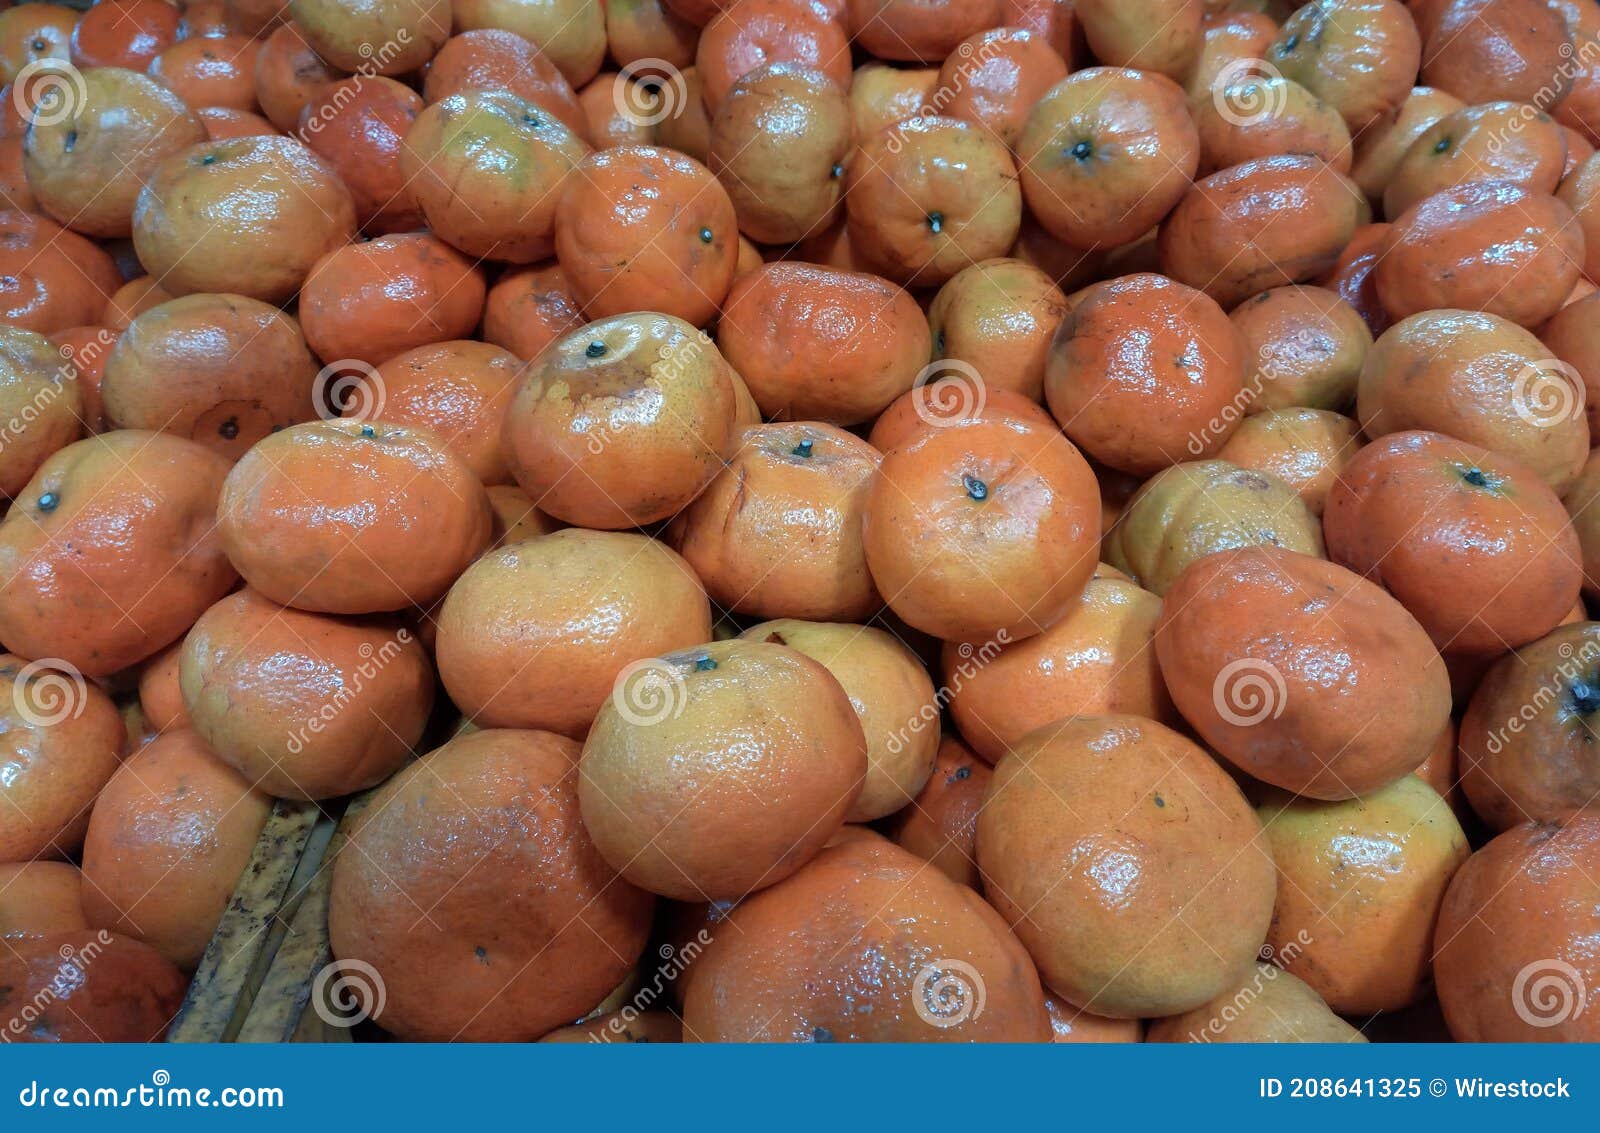 closeup of juicy ripe orange tangerines (citrus reticula) at the market good as a background